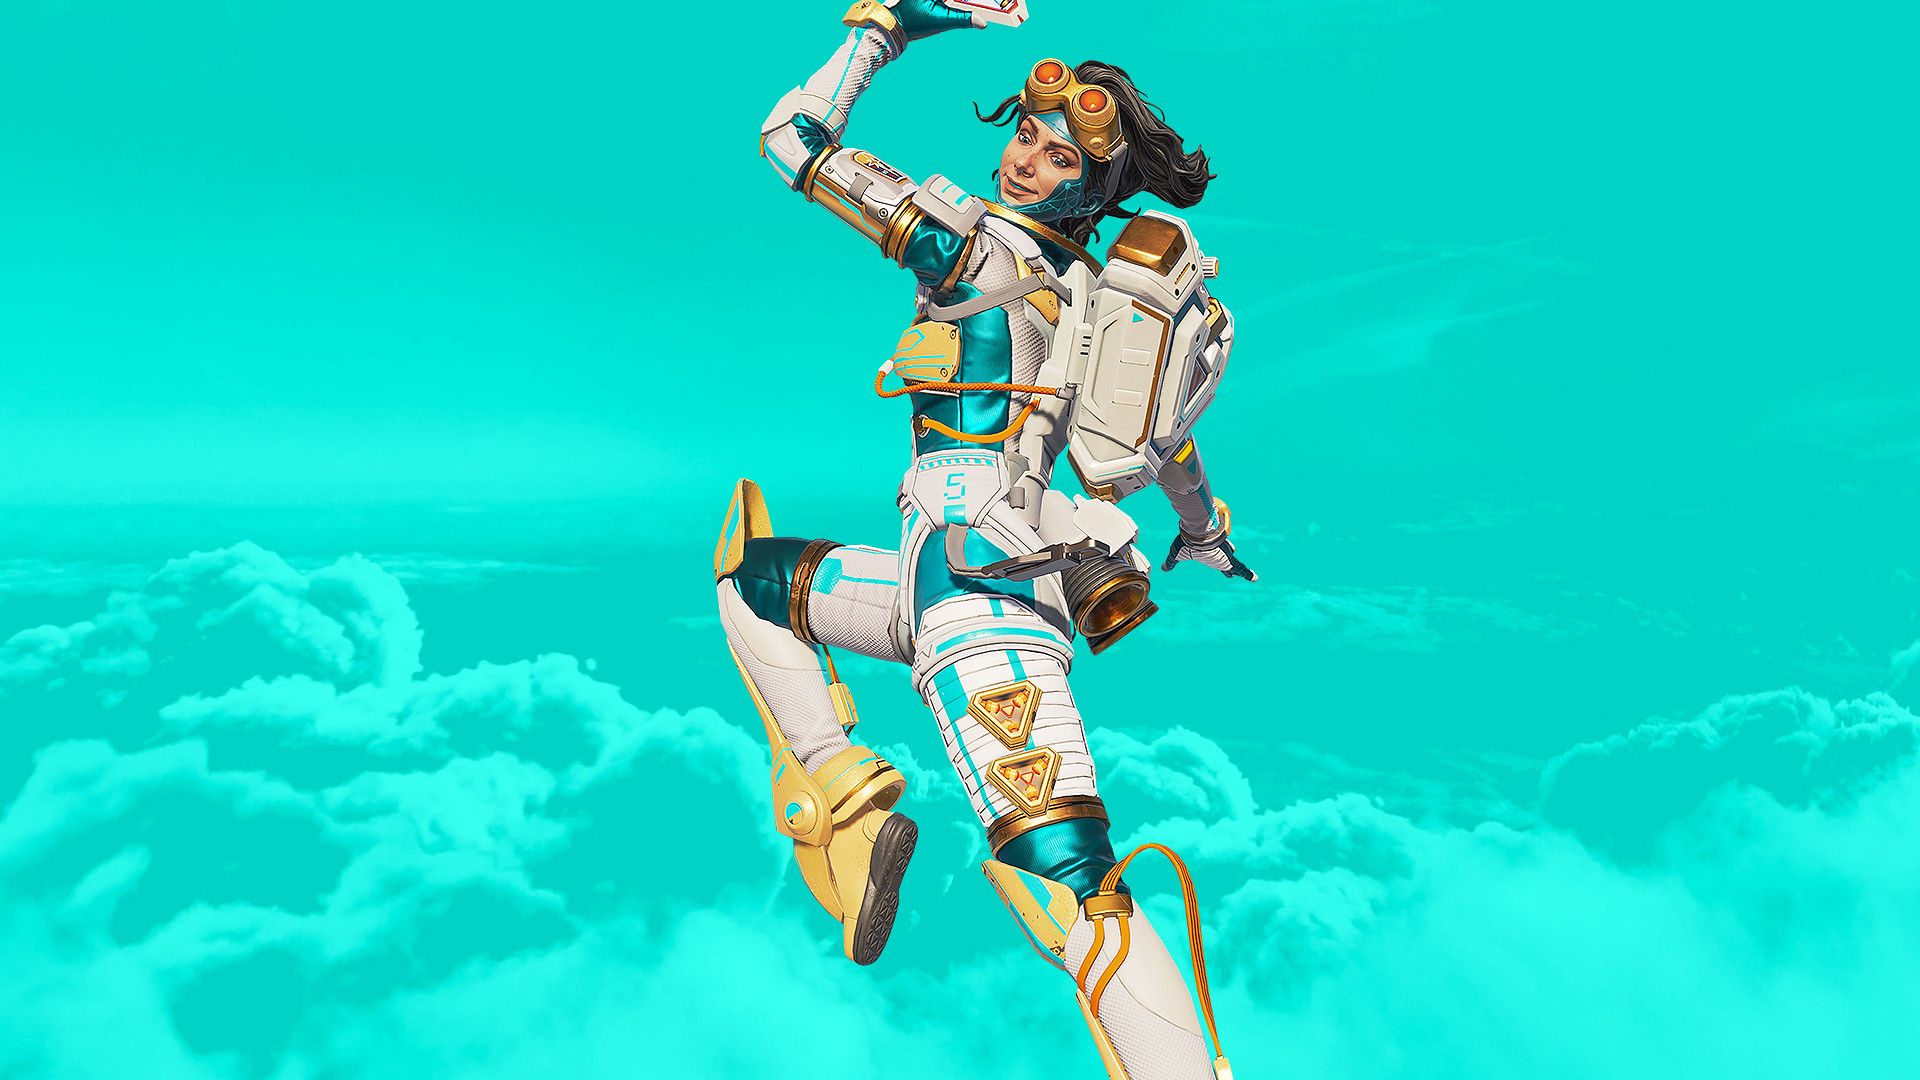 Apex Legends: Ascension Pack with Horizon skin available